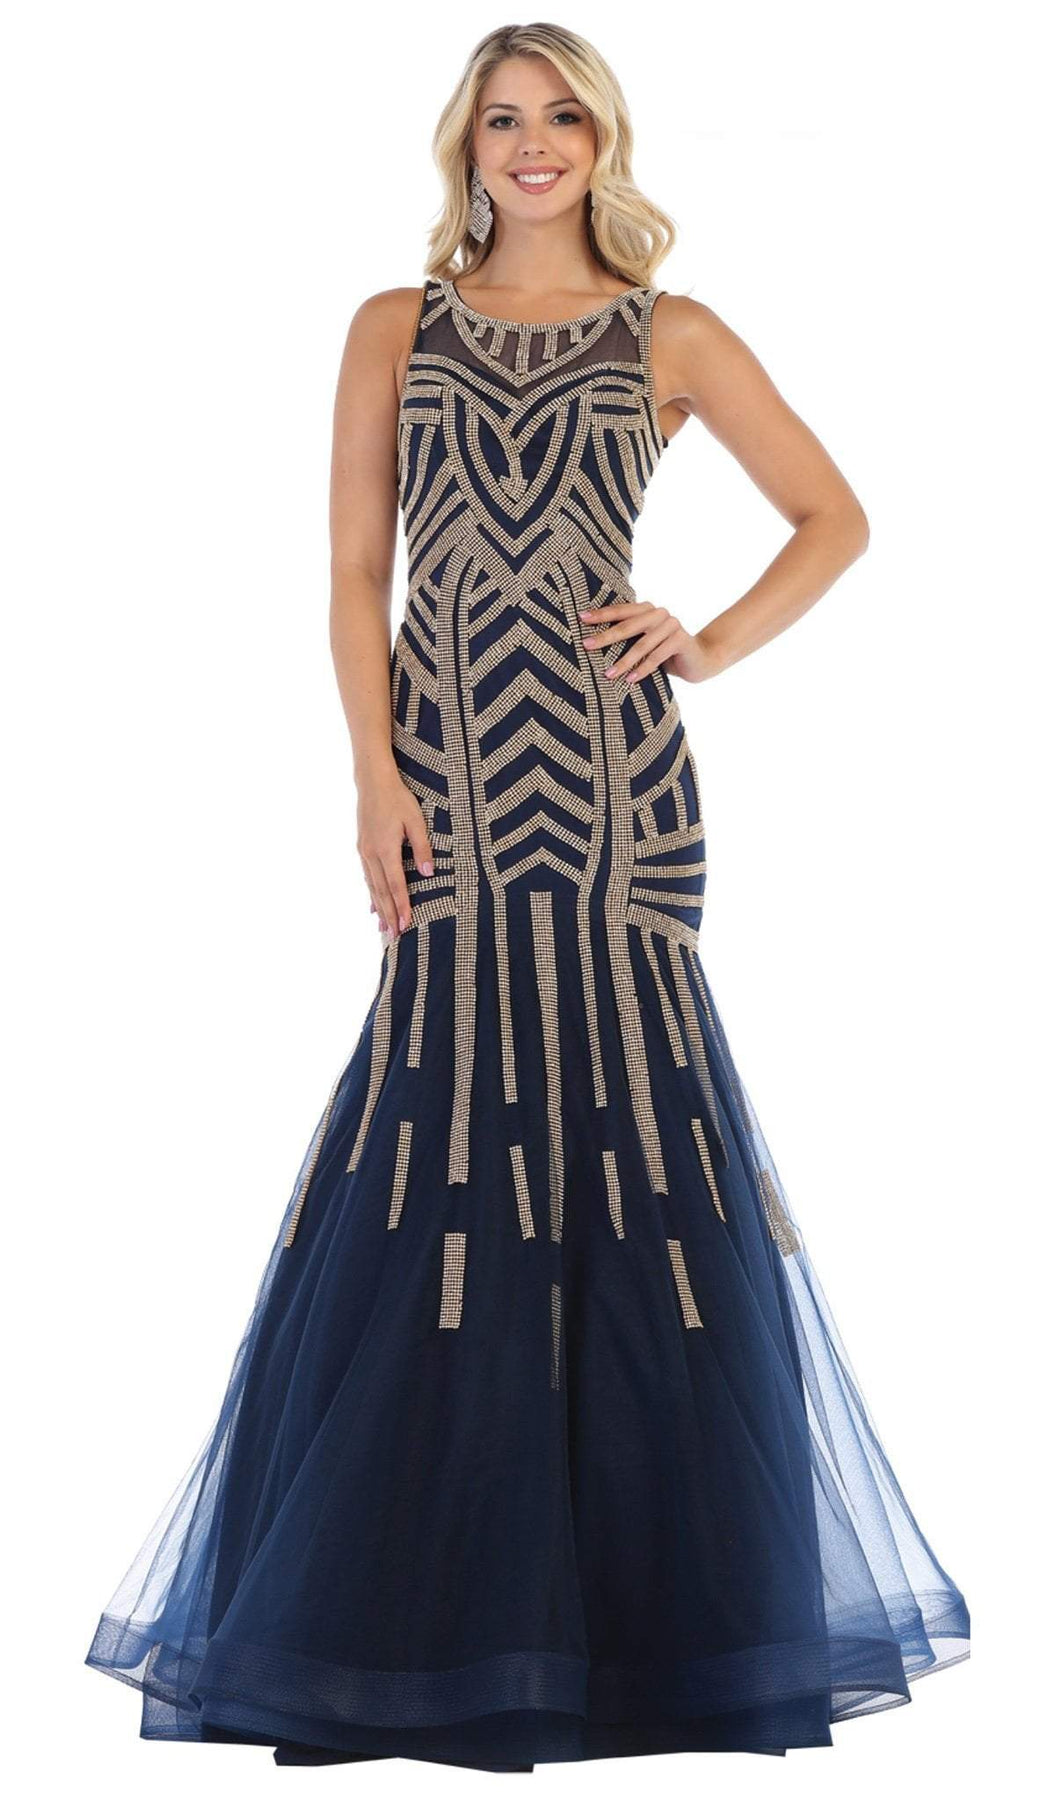 May Queen - RQ7646 Sequin Embellished Illusion Scoop Gown Special Occasion Dress 4 / Navy/Gold